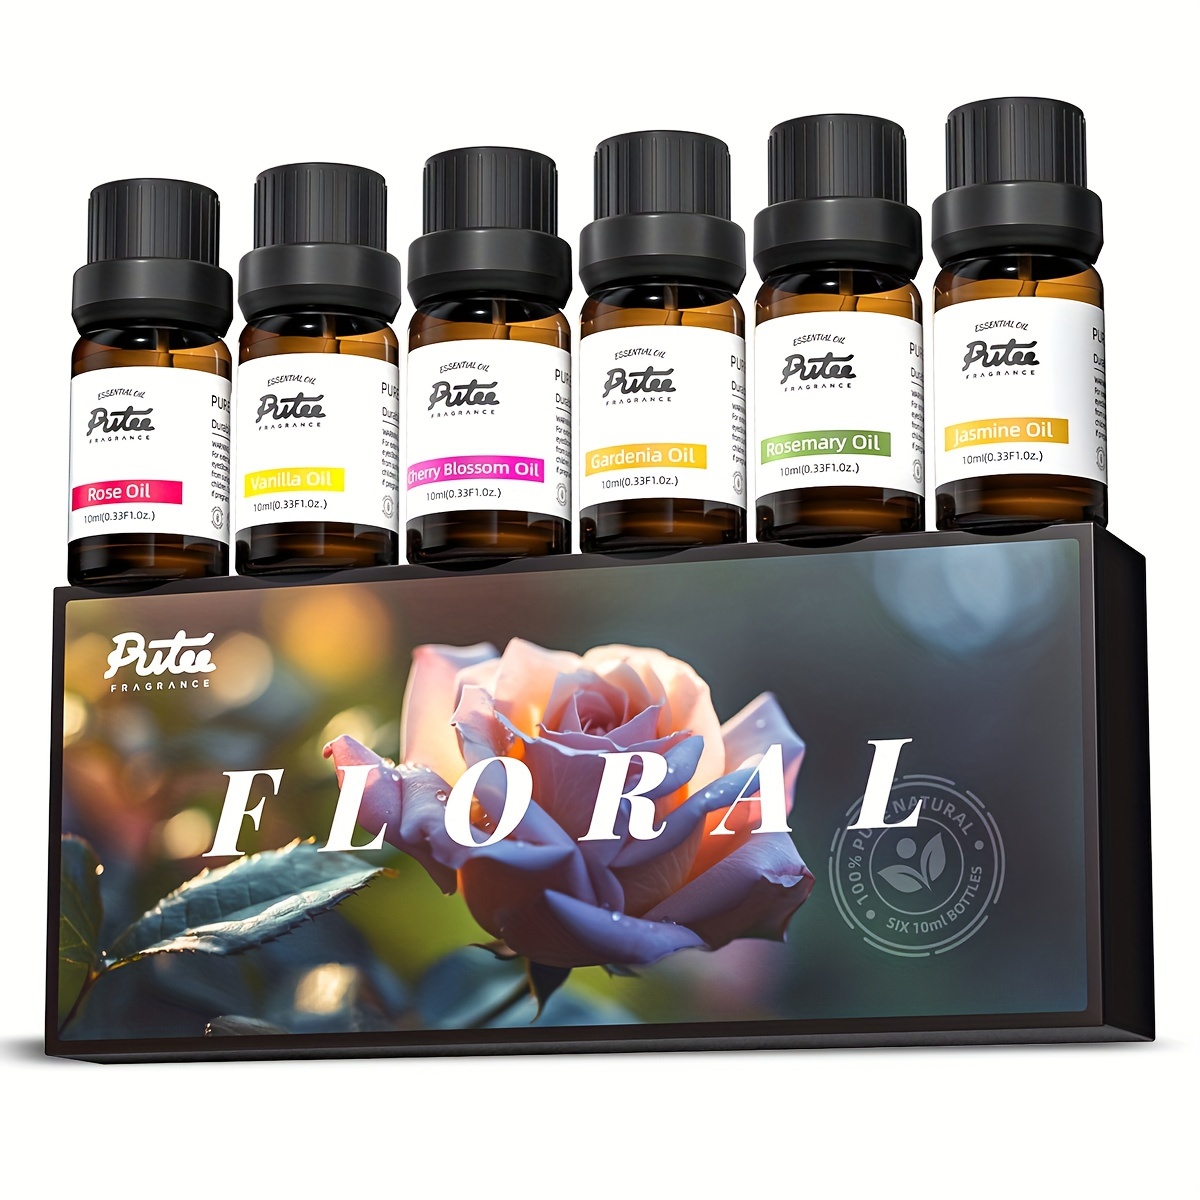 5x 10ml Floral Essential Oils Gift Set : Clove, Rose, Peony, Ylang